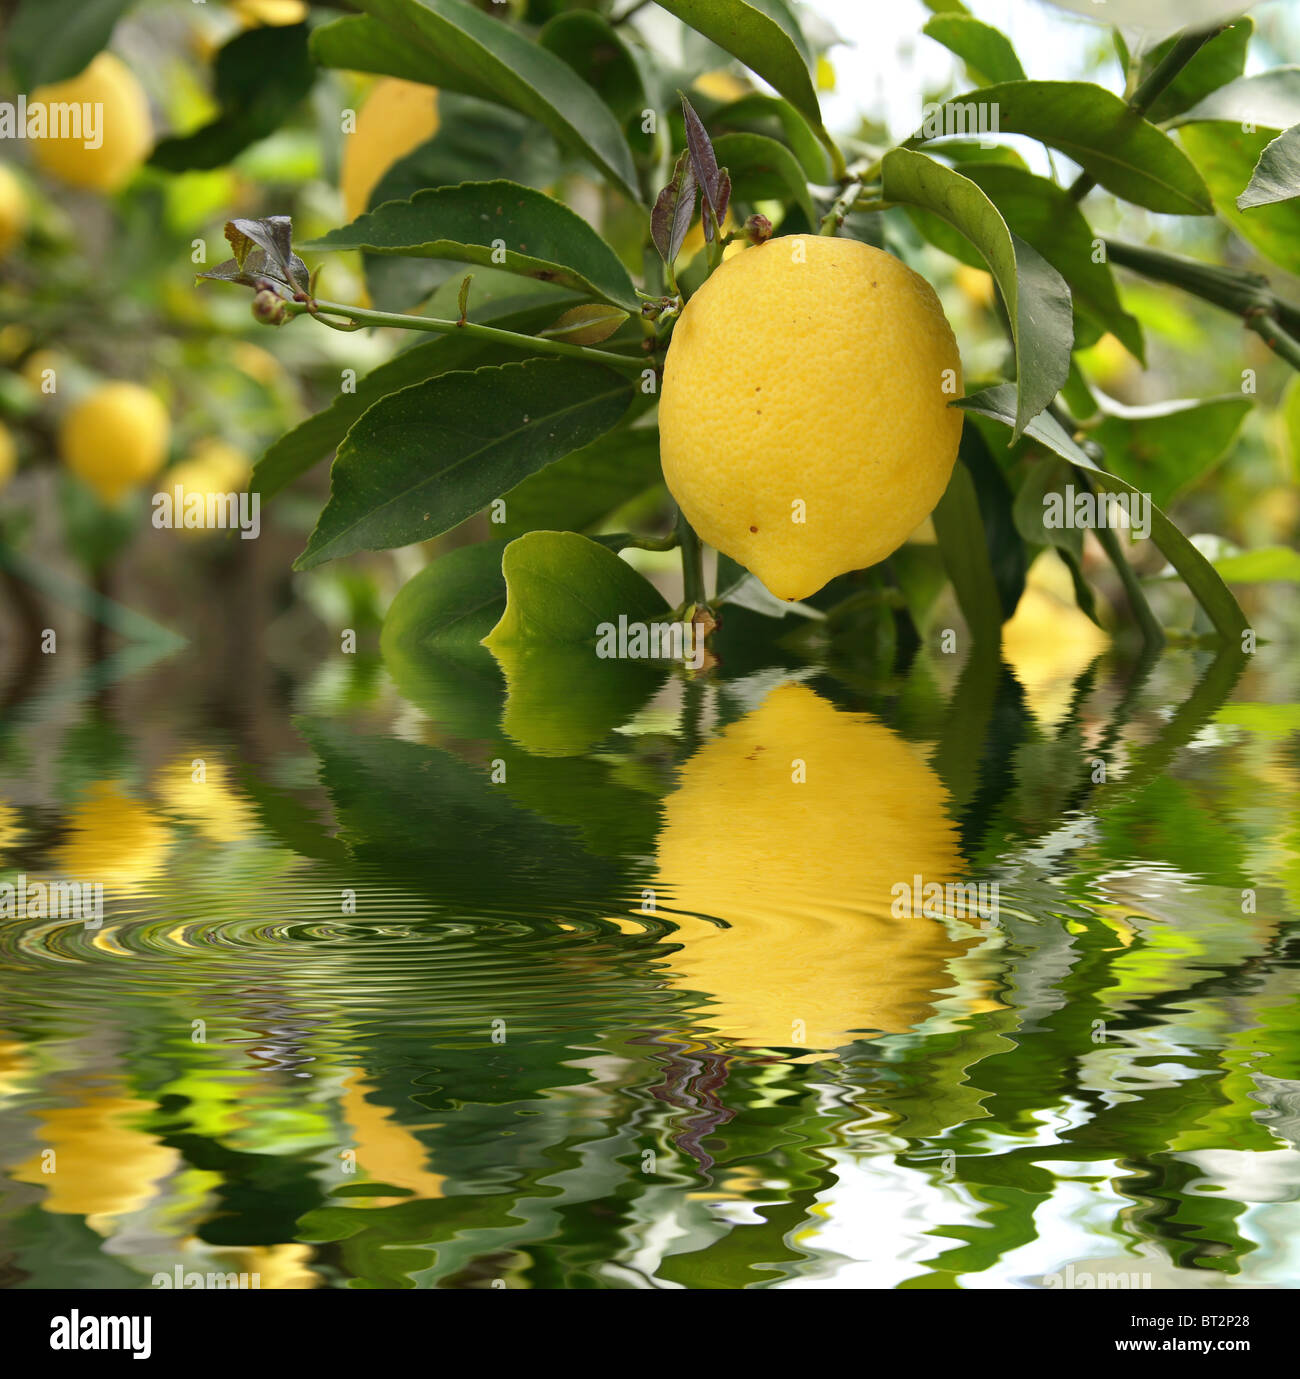 Yellow lemonl with foliage is reflected on water with ripple Stock Photo